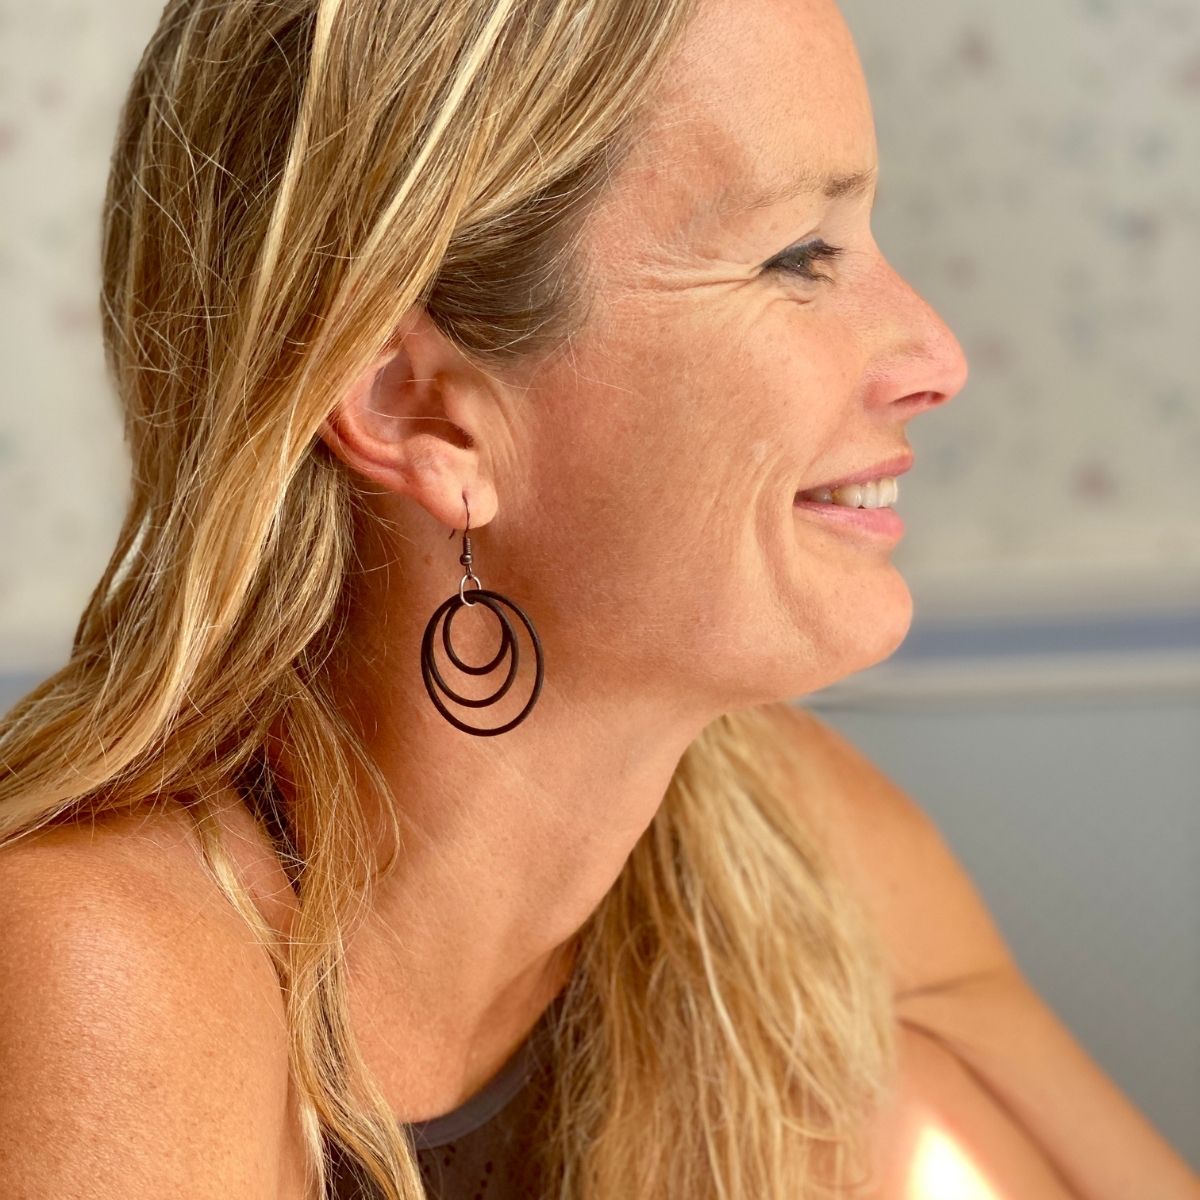 Zero Waste Eco Conscious Earrings with Up-recycled Scuba Gear O-rings